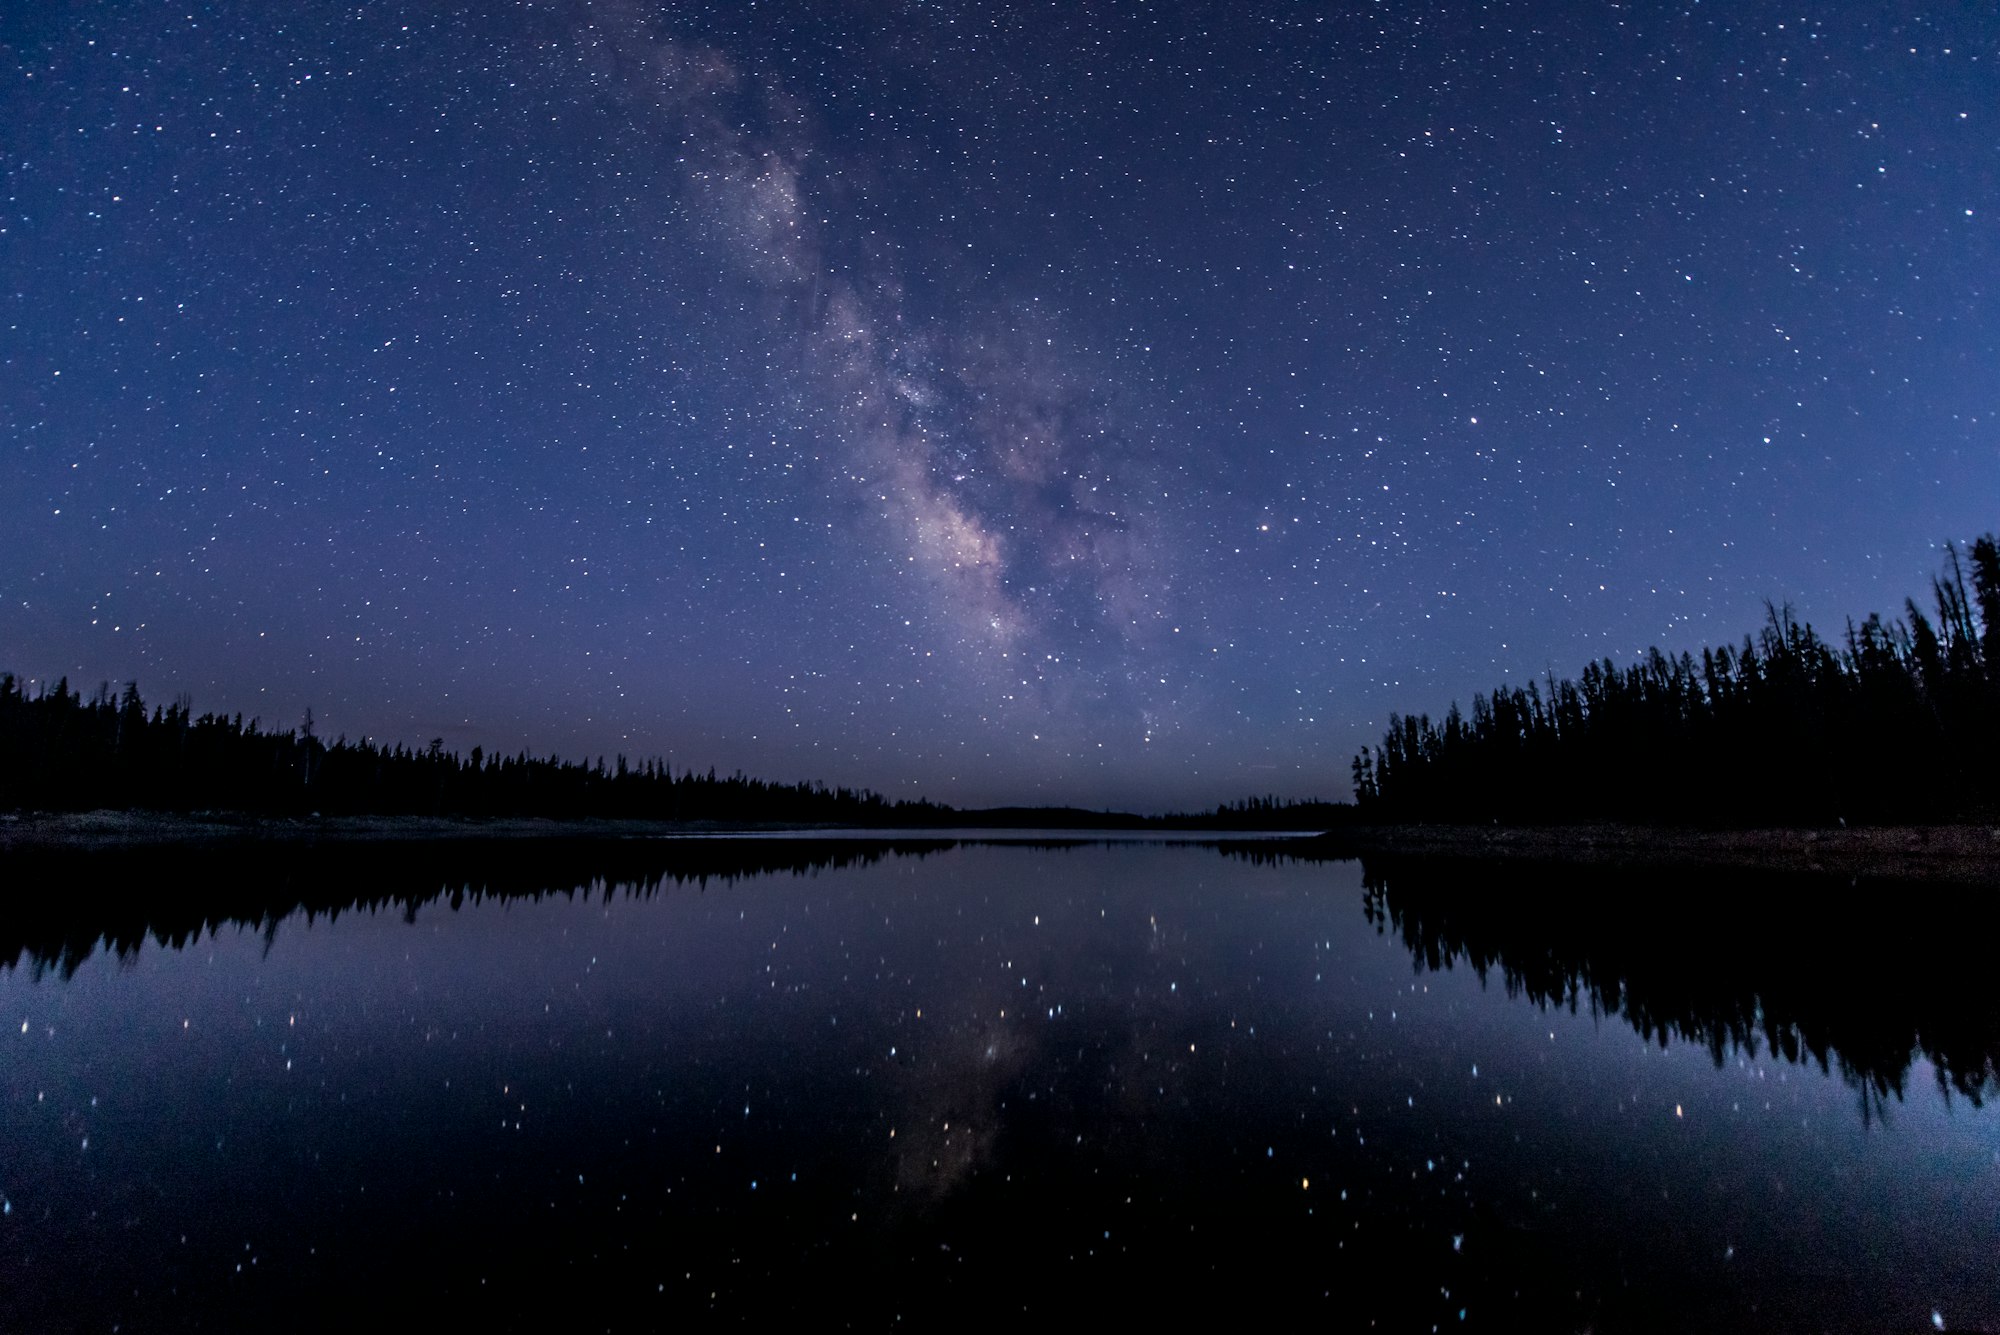 Spent the whole night in absolute silence at lost lake in the Uinta mountains watching the milky way roll across the horizon. This was taken just after the sun had gone down and the sky was still slightly blue.